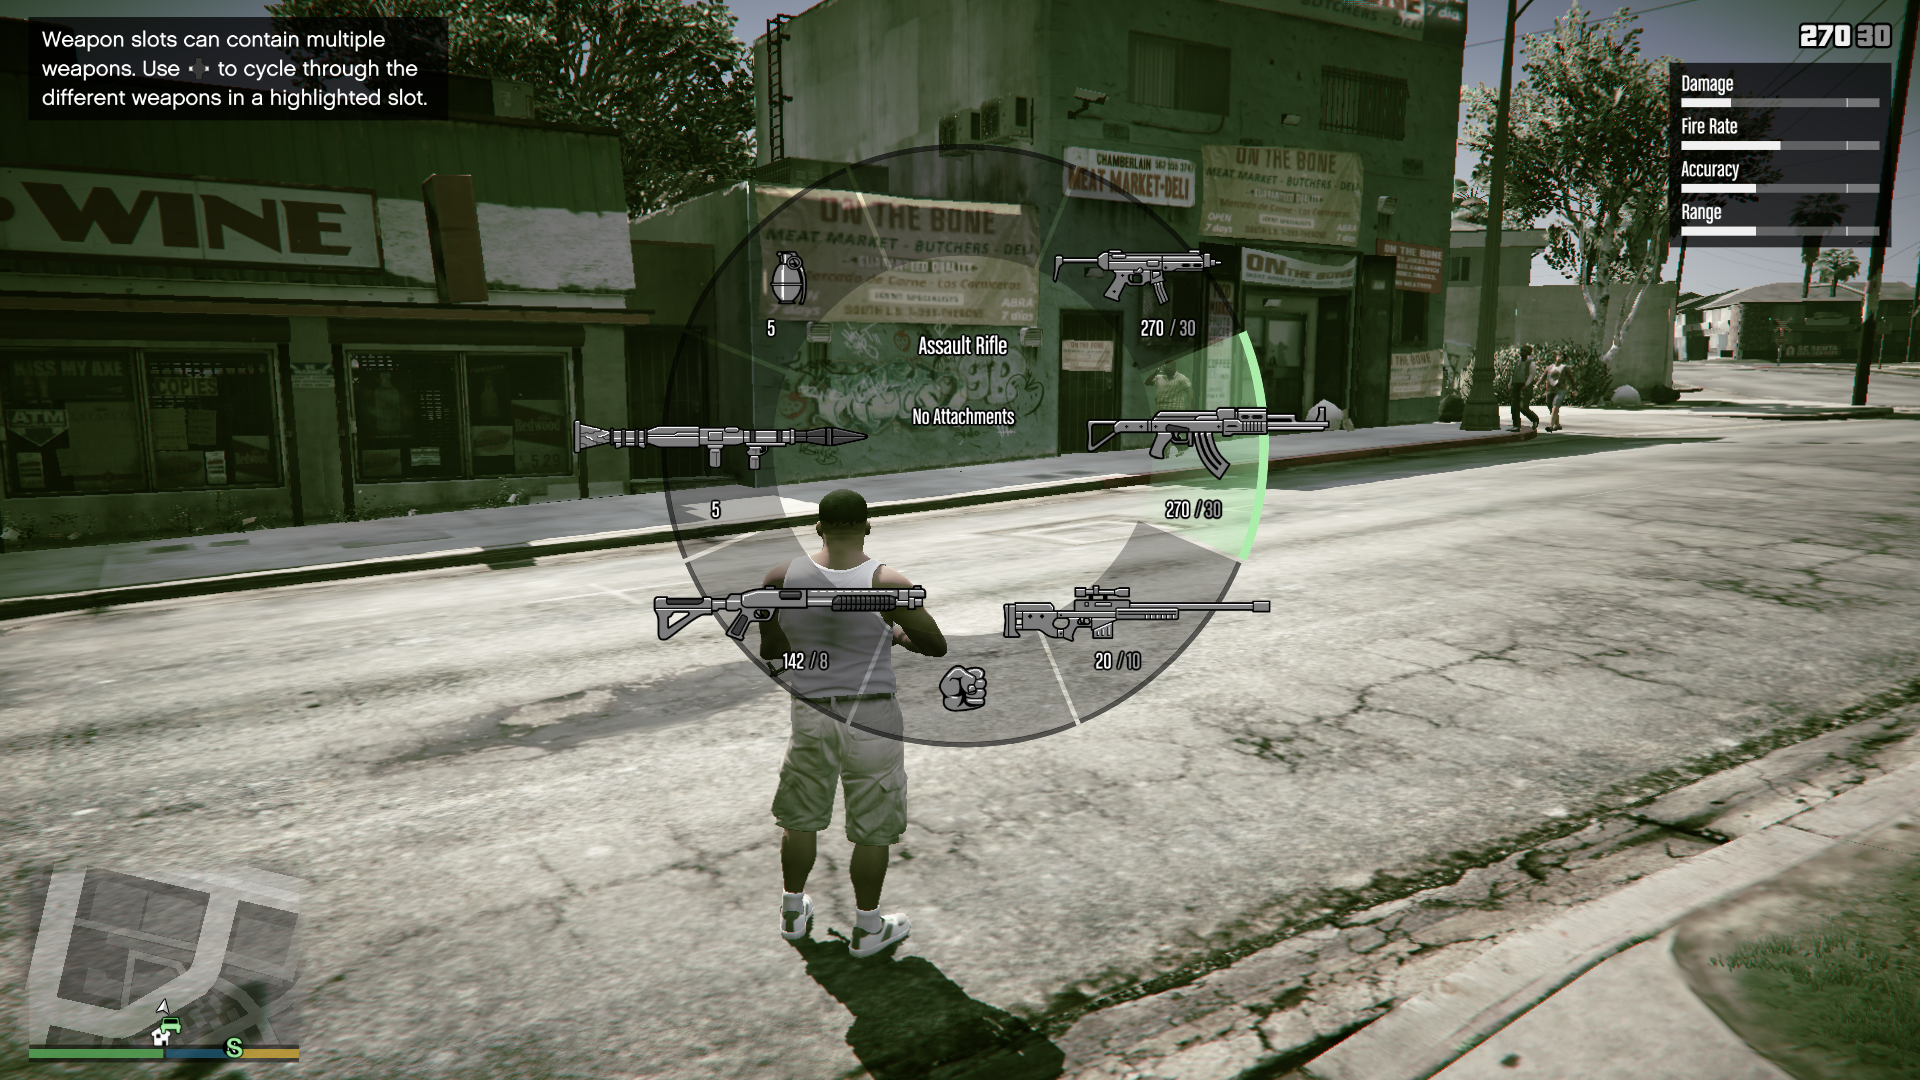 A screenshot from Grand Theft Auto 5, showing an inventory full of weapons.